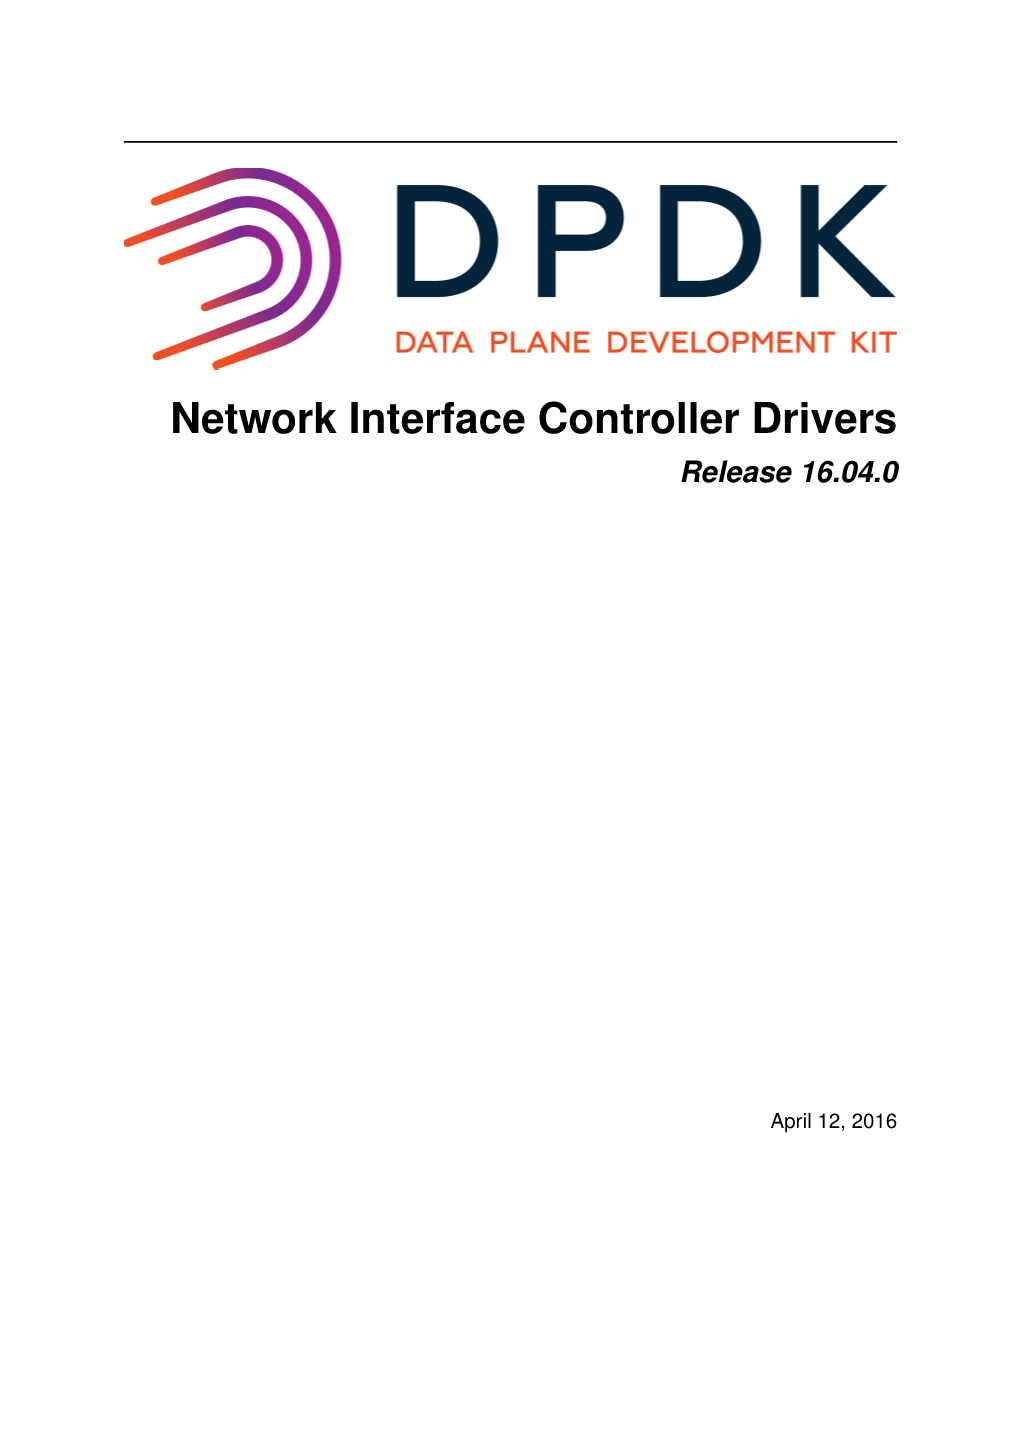 Network Interface Controller Drivers Release 16.04.0